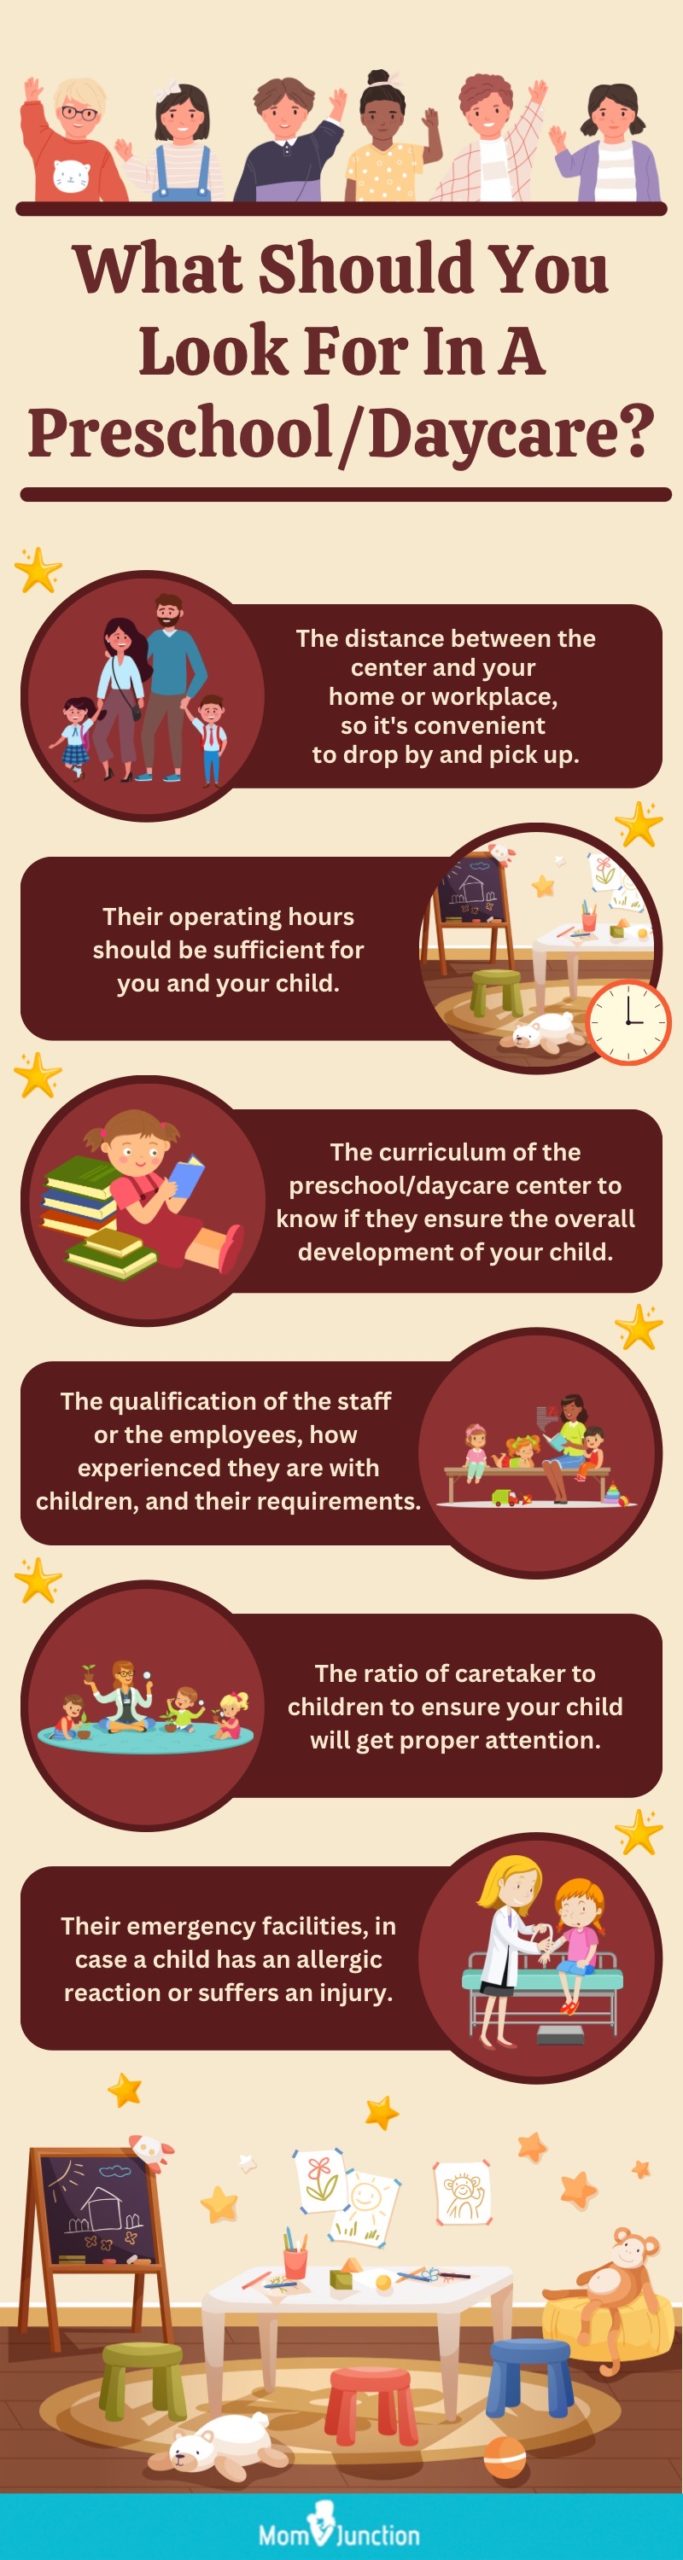 7 Things to Consider When Choosing a Daycare - Wee Care Preschool